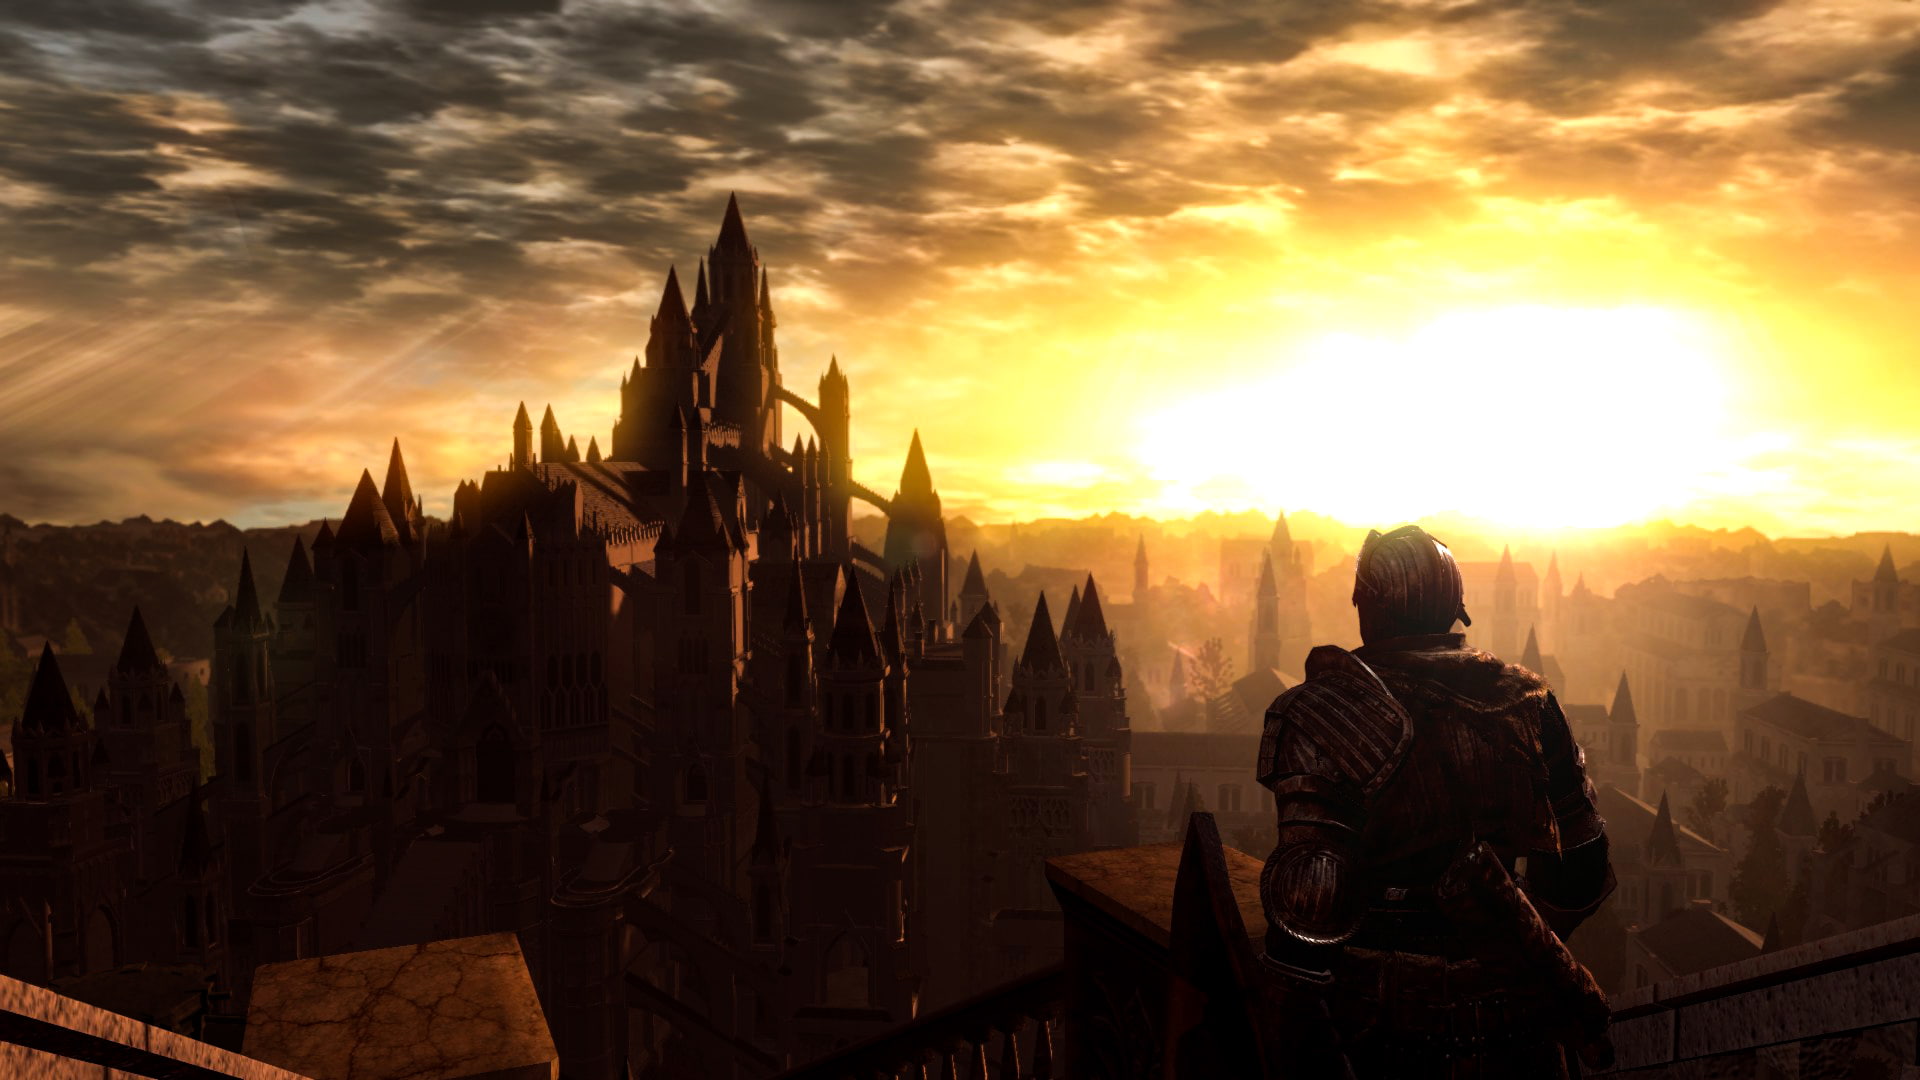 video games, Dark Souls: Remastered, sky, sunset, architecture